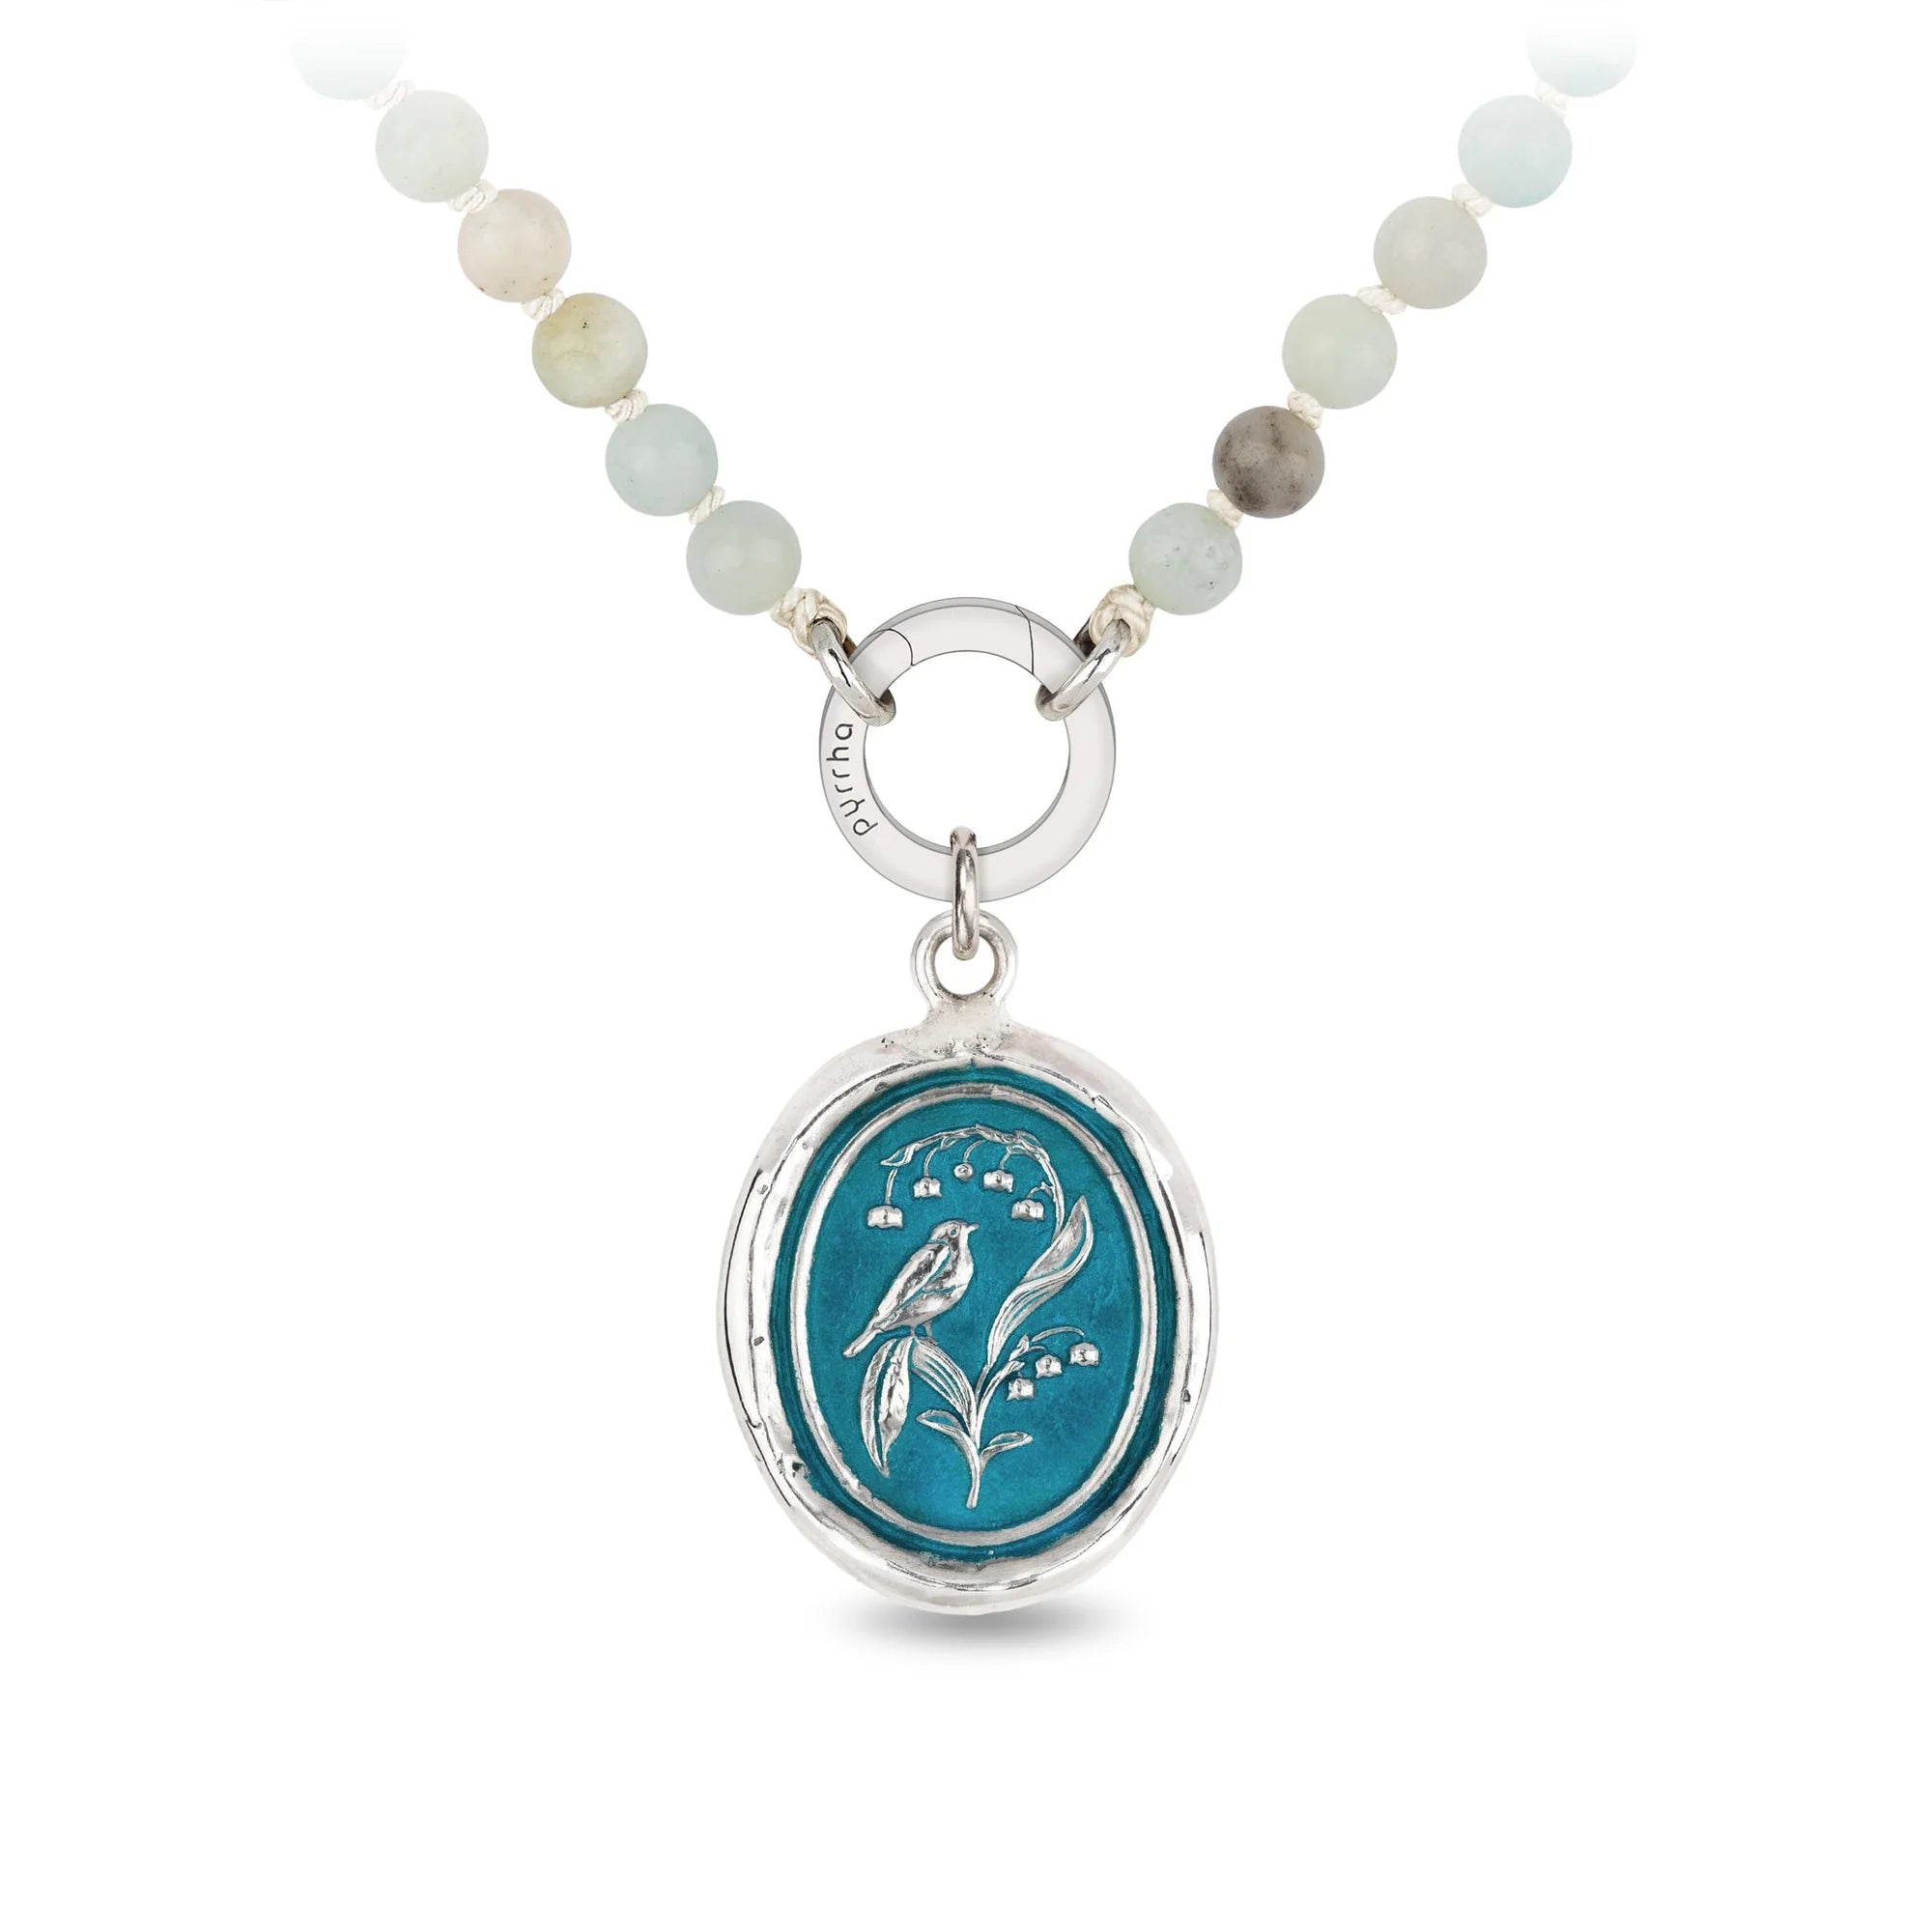 Pyrrha Sterling Silver and Ceramic Capri Blue "Return to Happiness" Talisman Beaded Chain Necklace